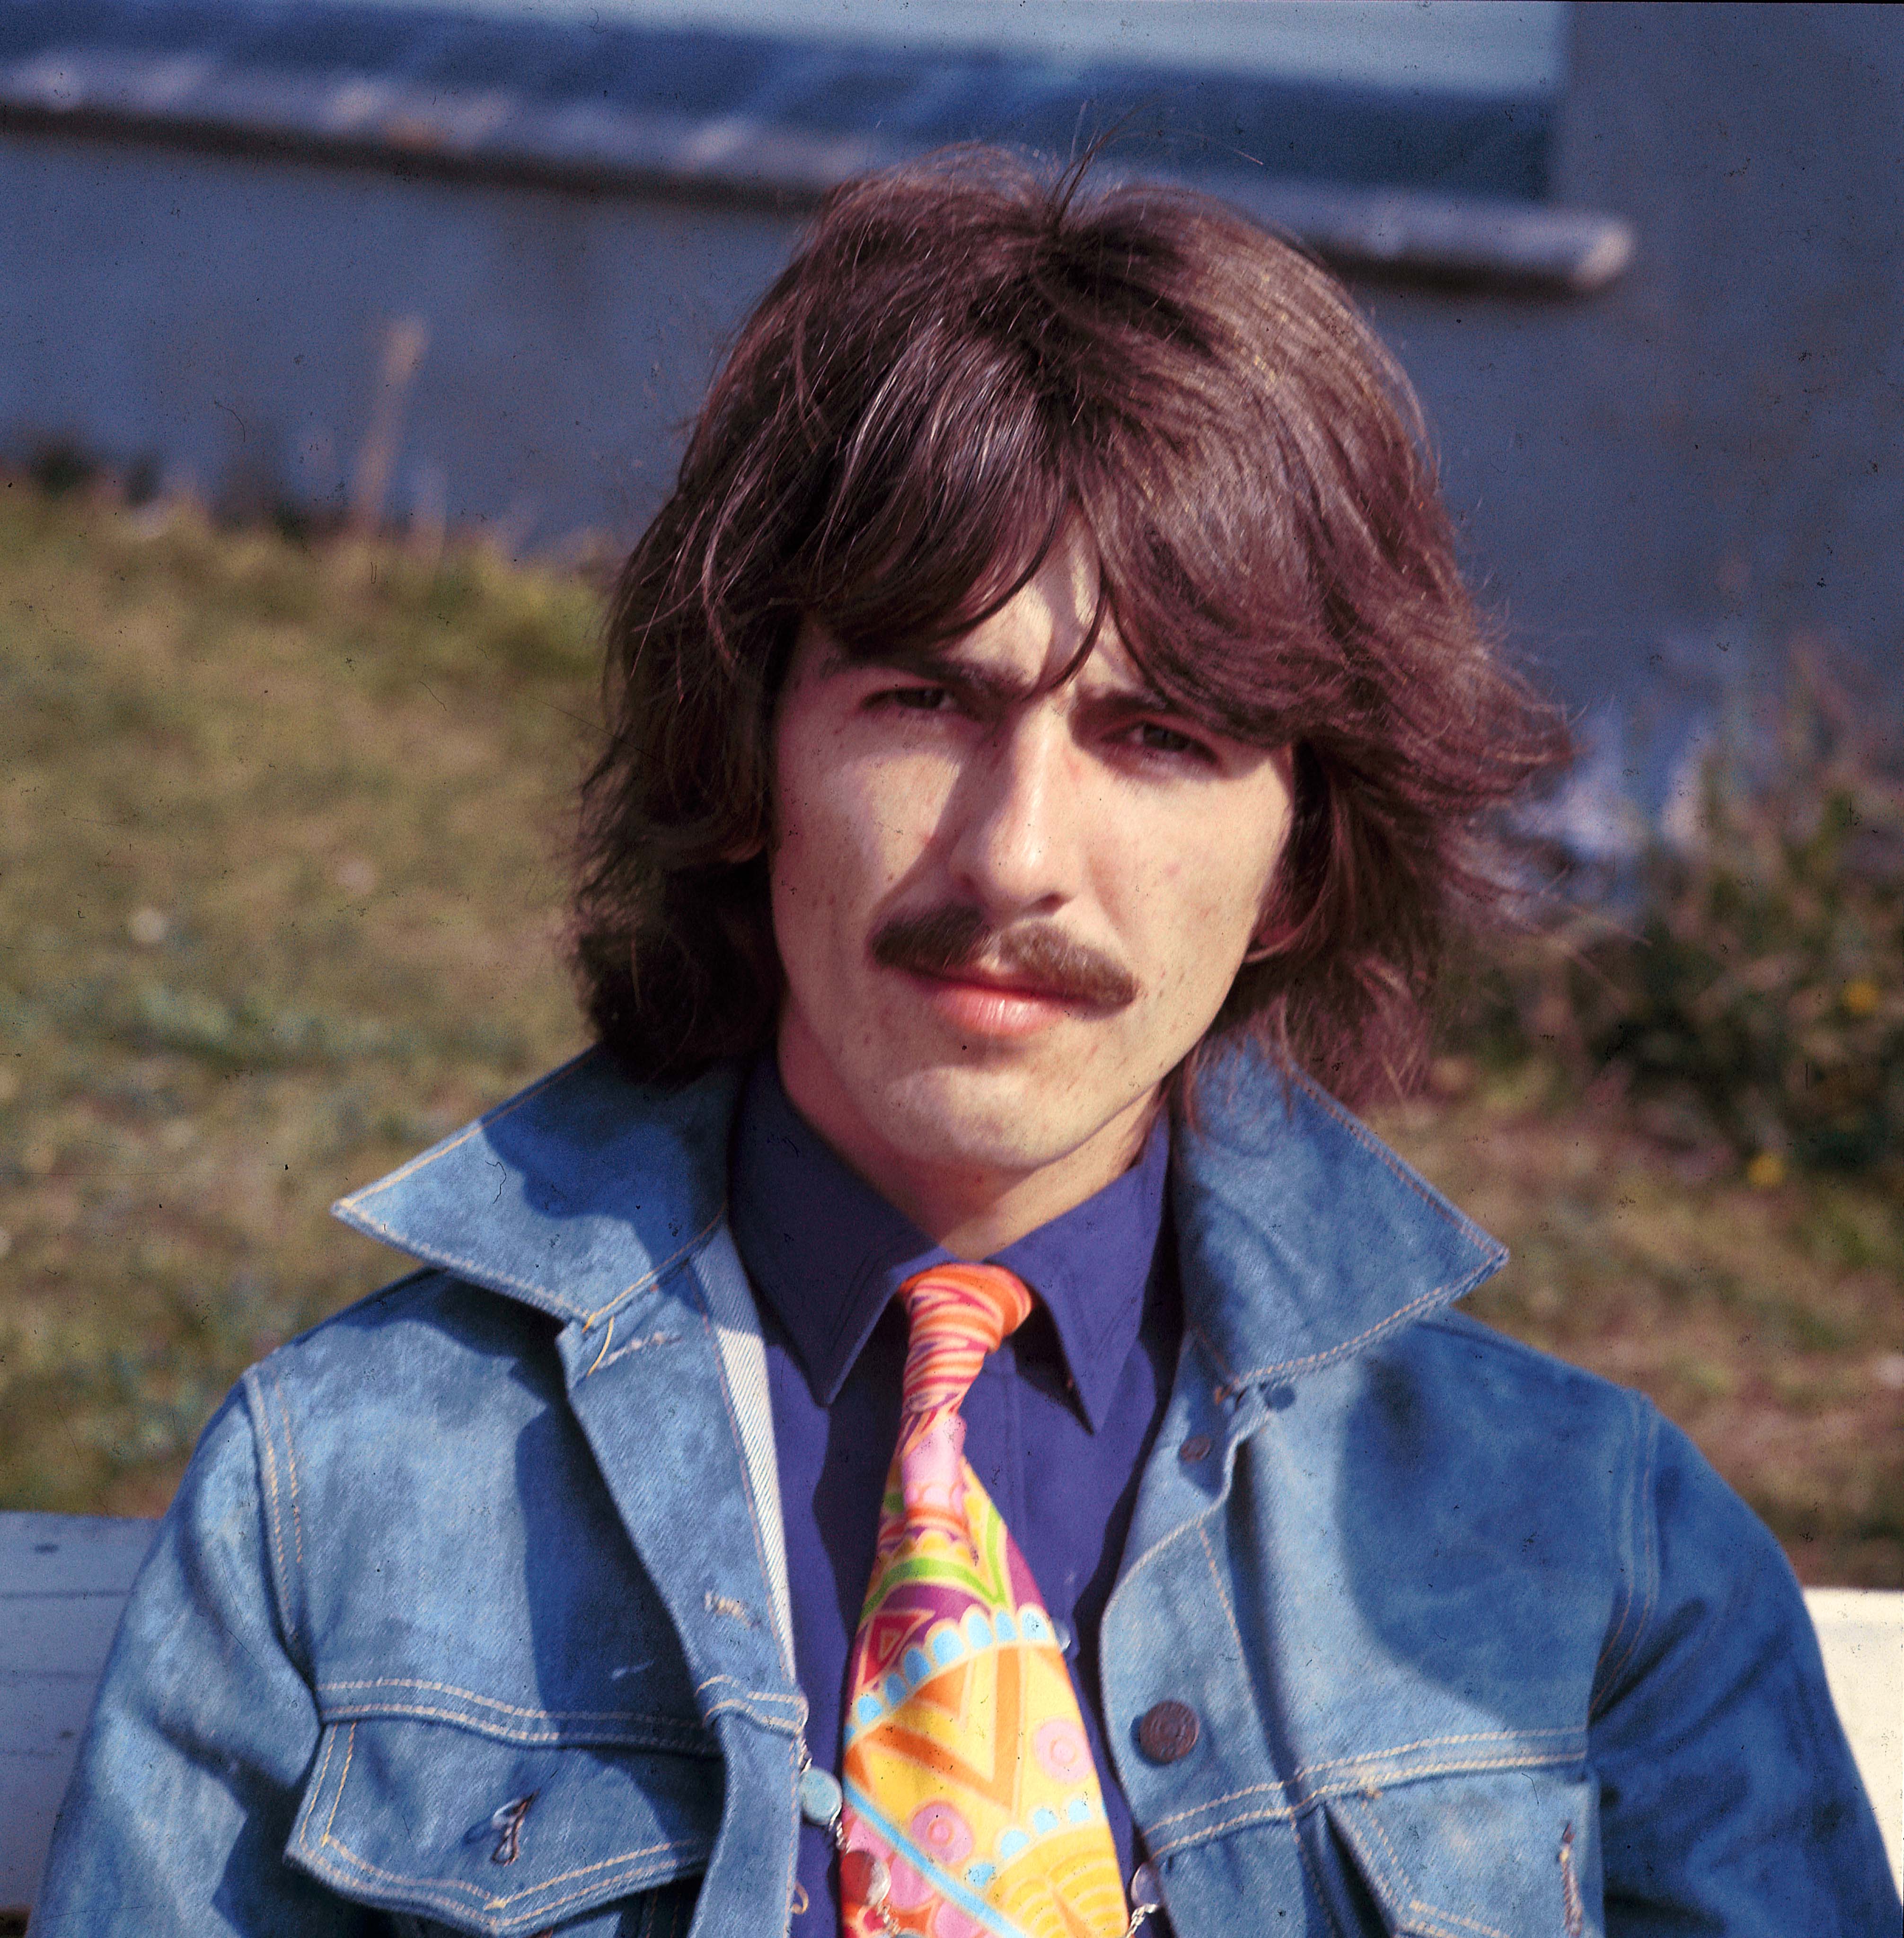 George Harrison of The Beatles, wearing a denim jacket, takes part in filming of the television musical film 'Magical Mystery Tour' in Plymouth, Devon on September 12, 1967.